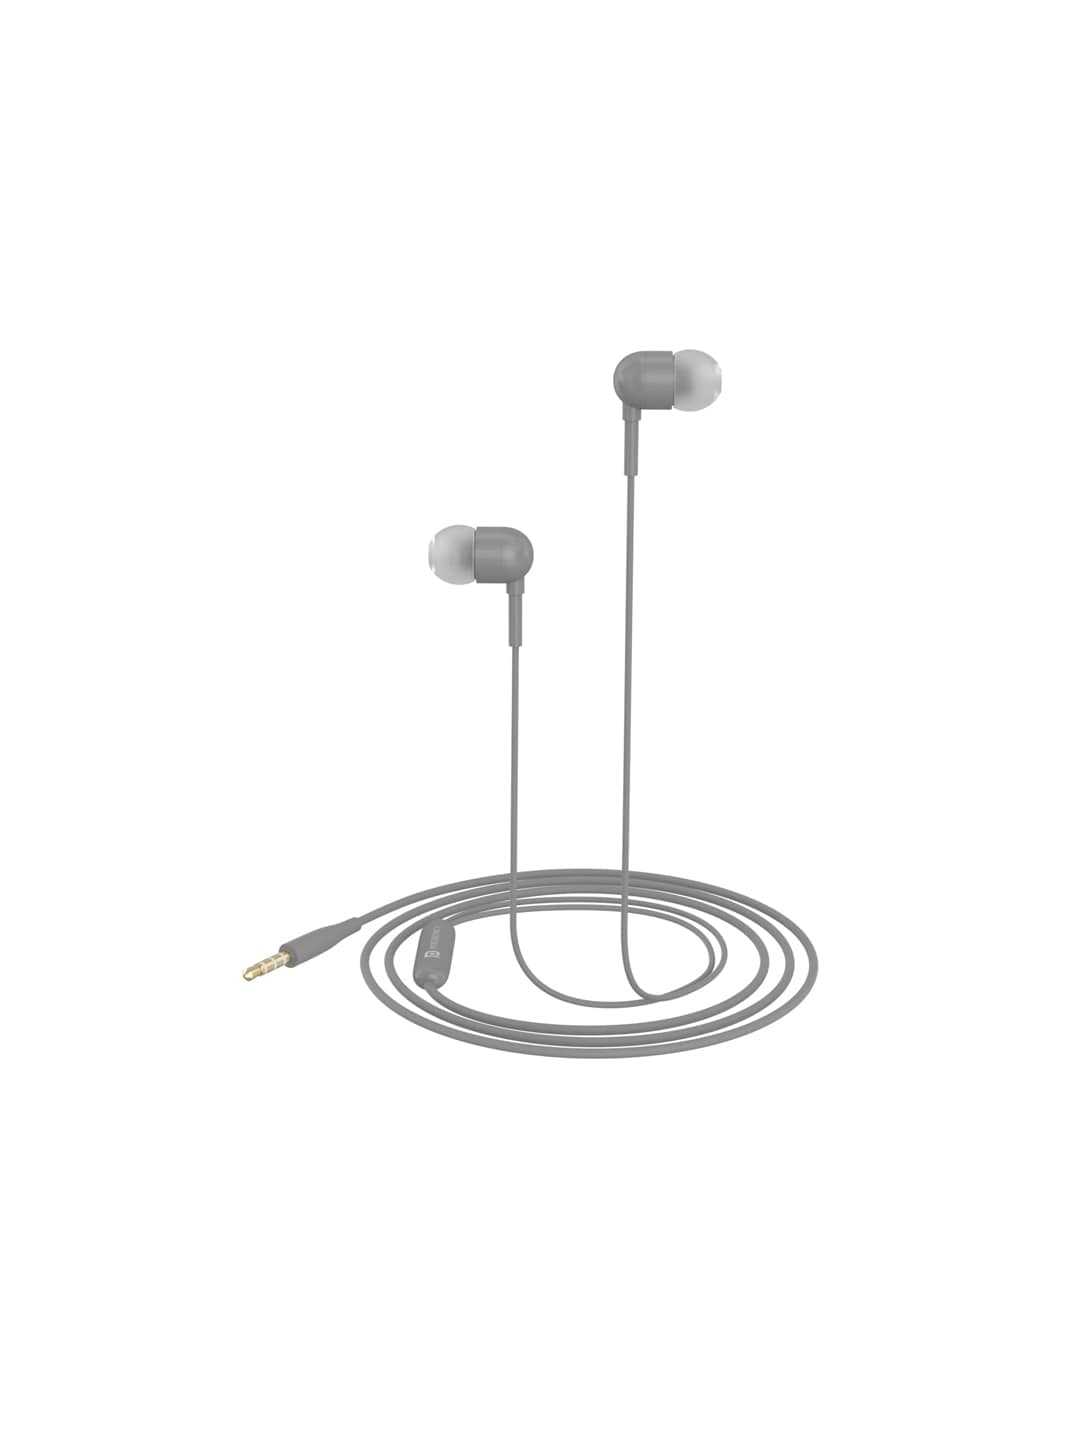 Portronics Grey Solid 3.5 mm Bass In-Ear Wired Earphones With Mic Price in India